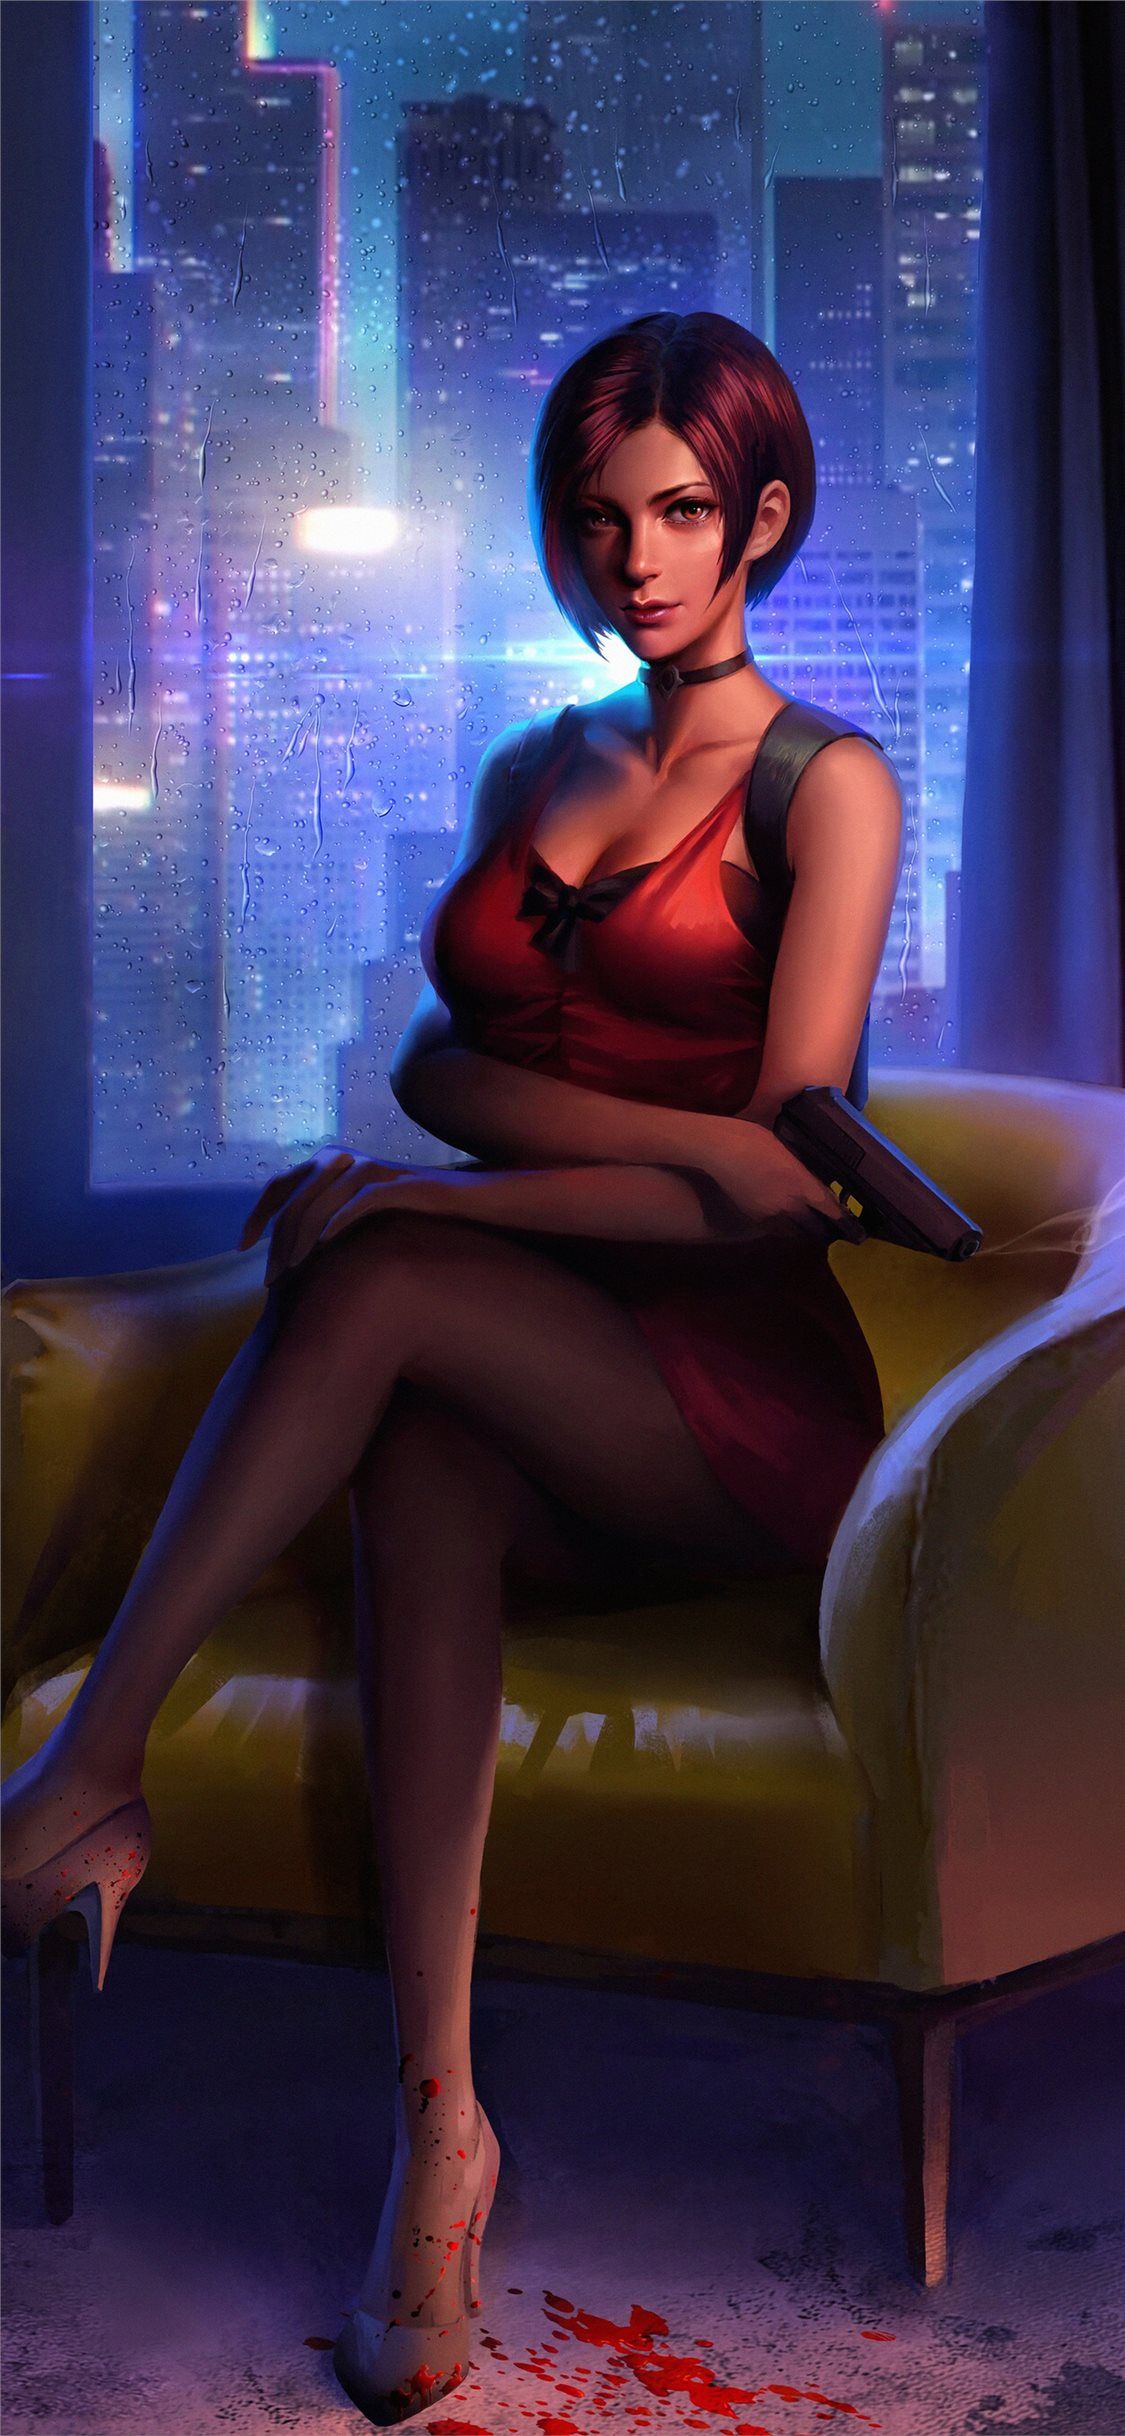 ada wong resident evil 2 fictional character 4k iPhone X Wallpaper Free Download